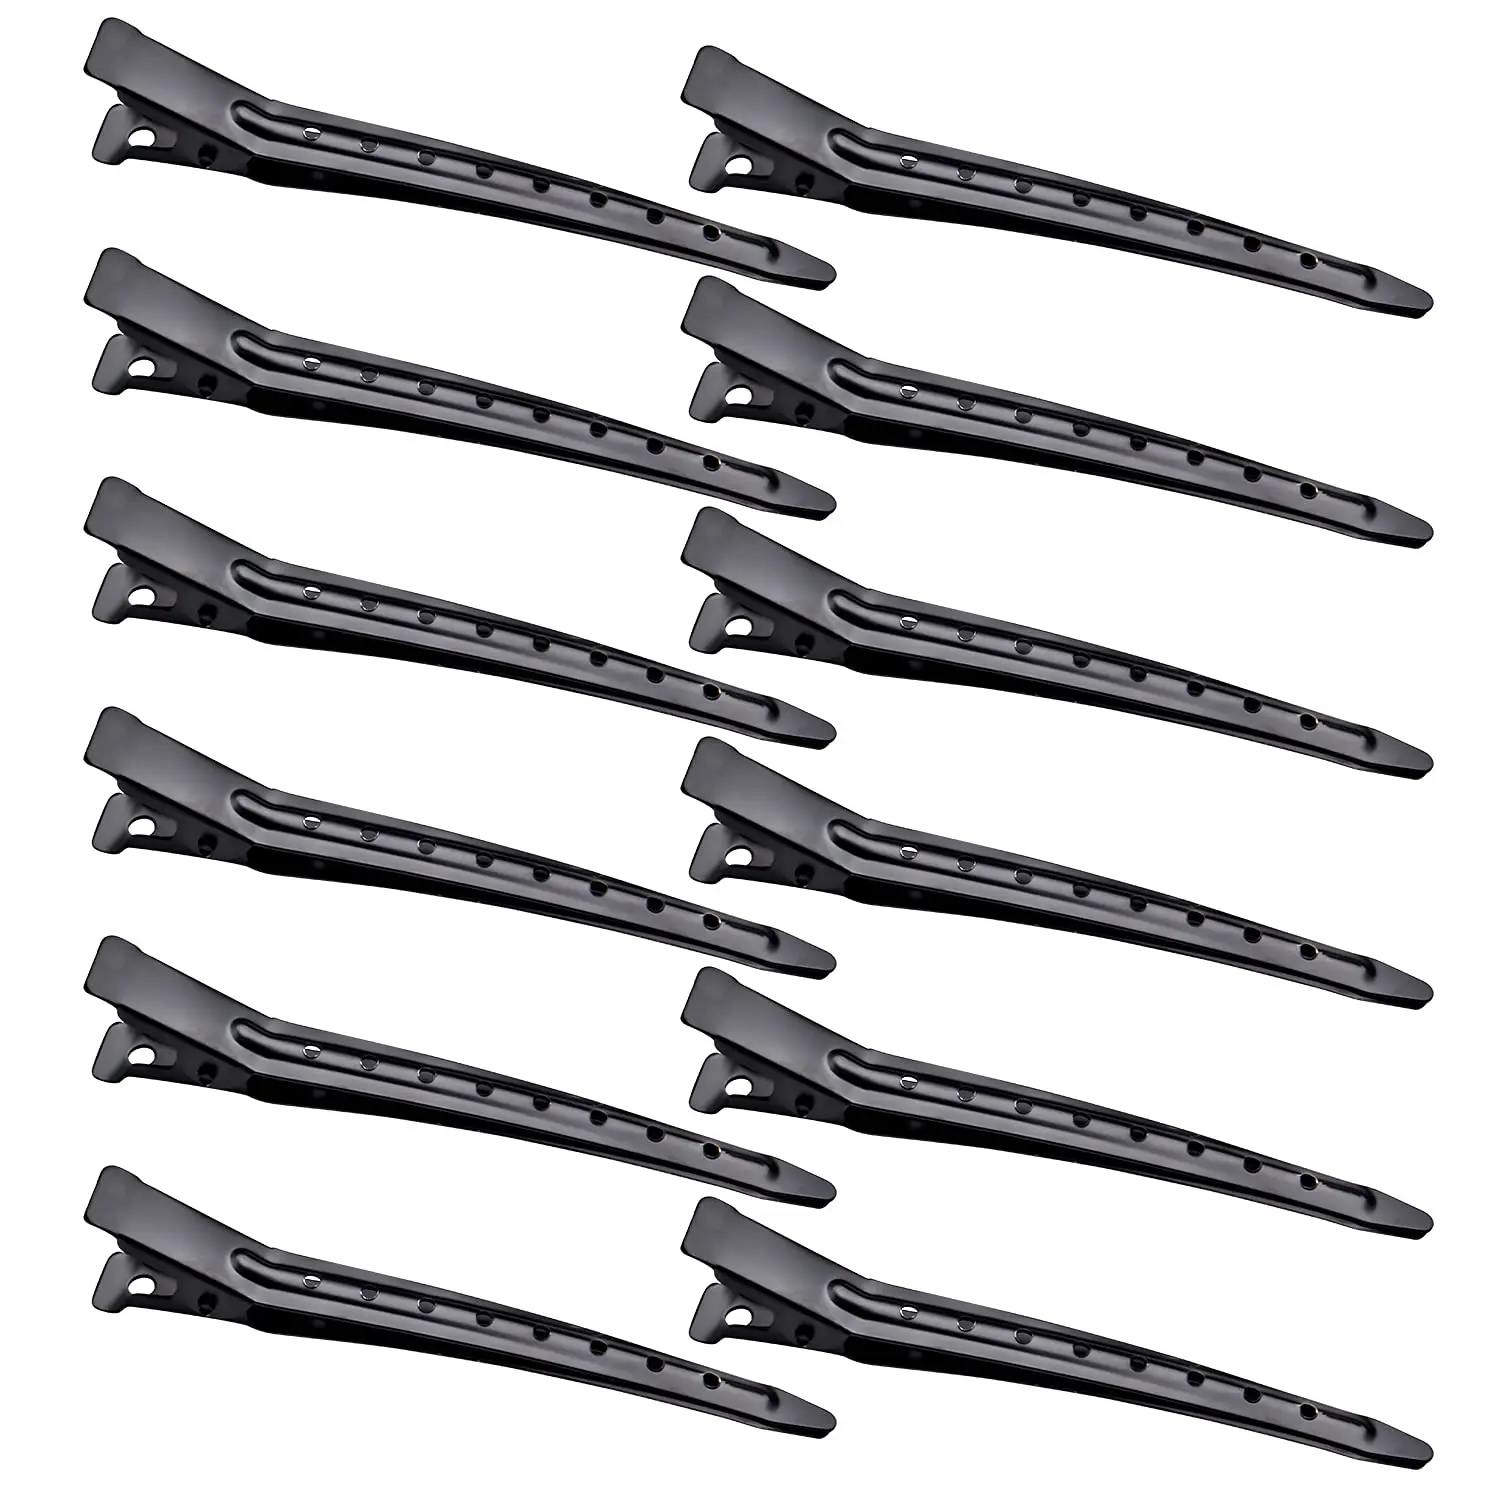 50pcs 3.5 Inches Black Metal Duck Bill Alligator Hair Clips Sectioning Curl Clips with Holes for Women Girls Salon Hair Styling